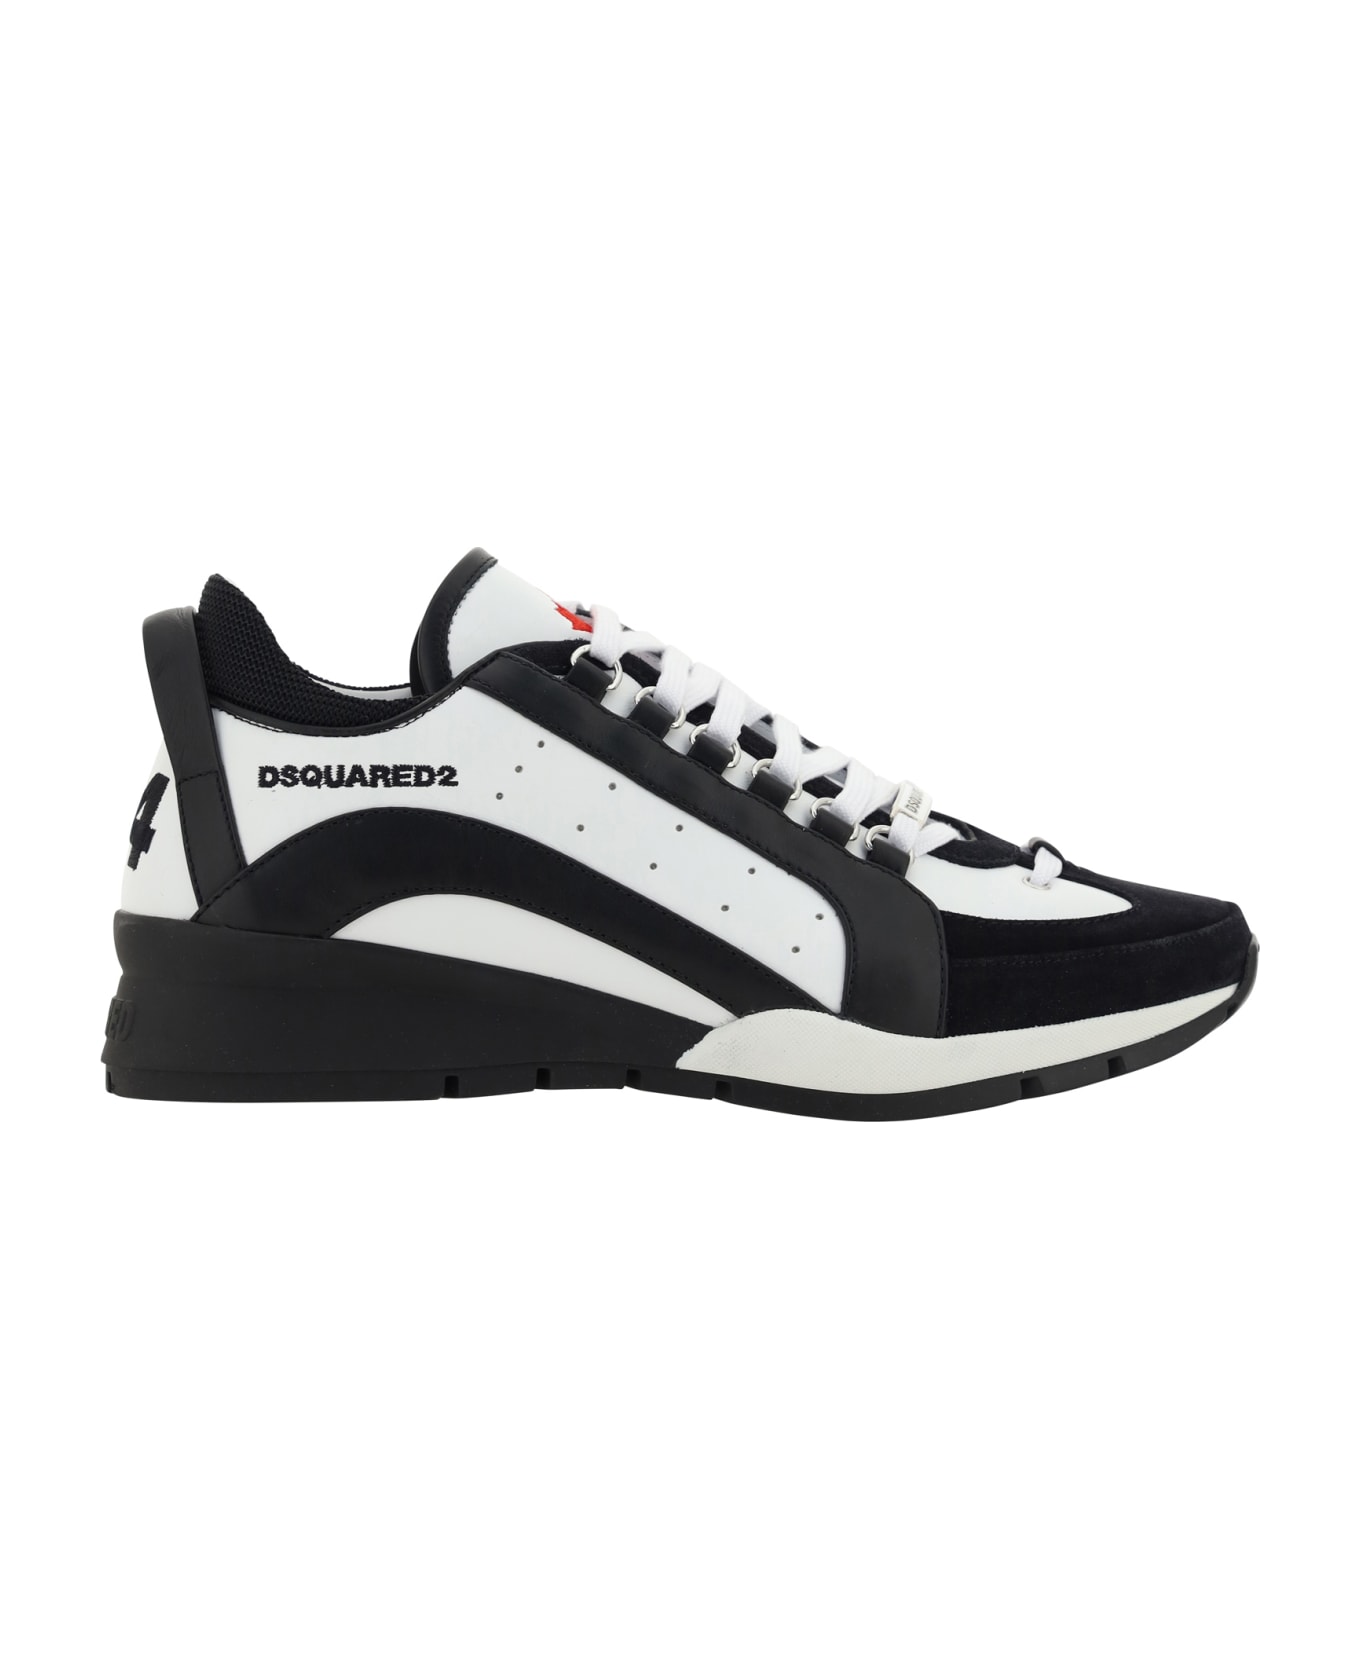 Dsquared2 Legendary Leather Low-top Sneakers - black